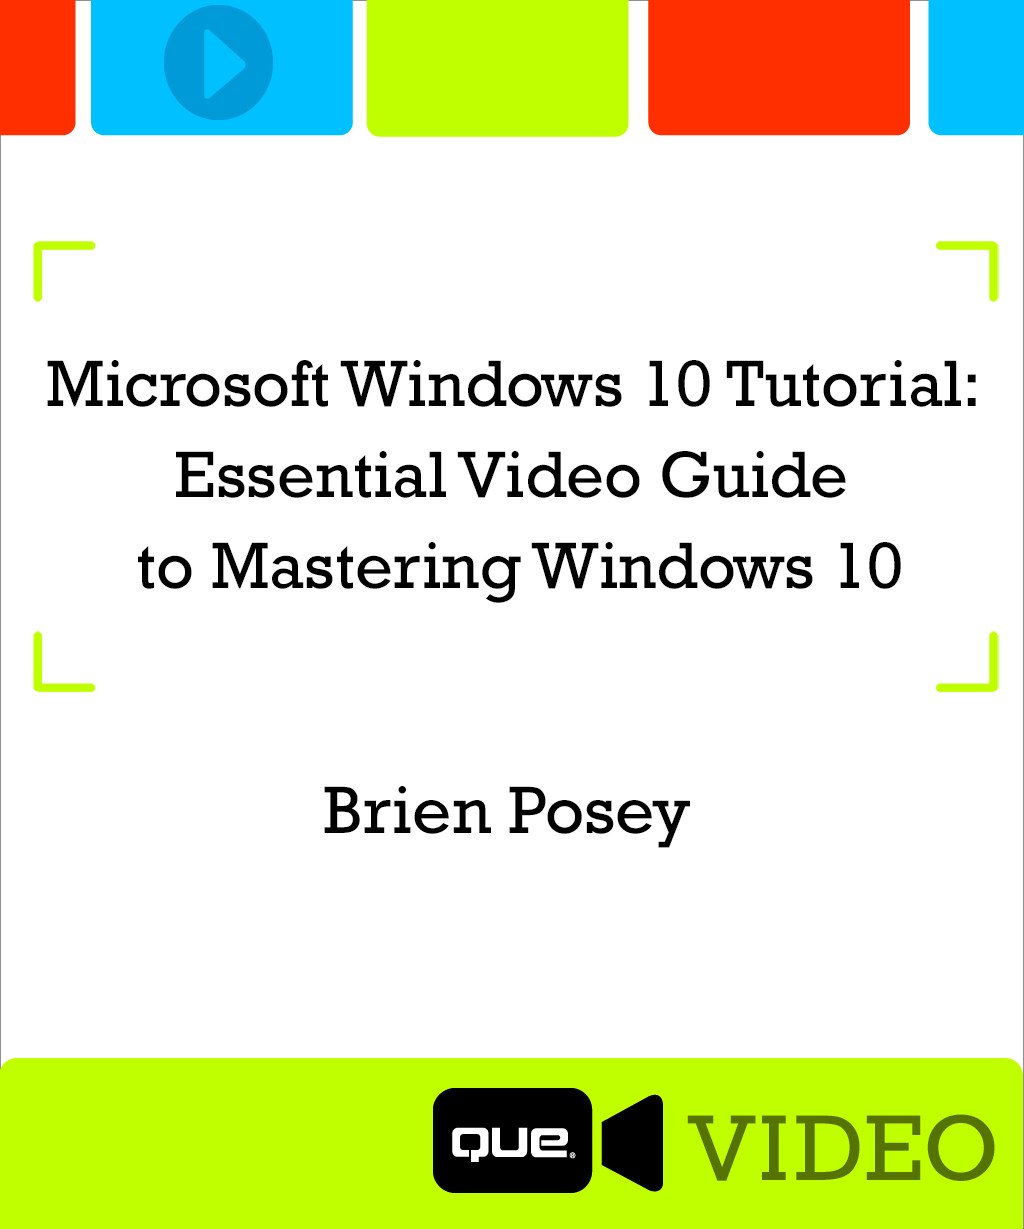 Part 1: Getting Started with Windows 10